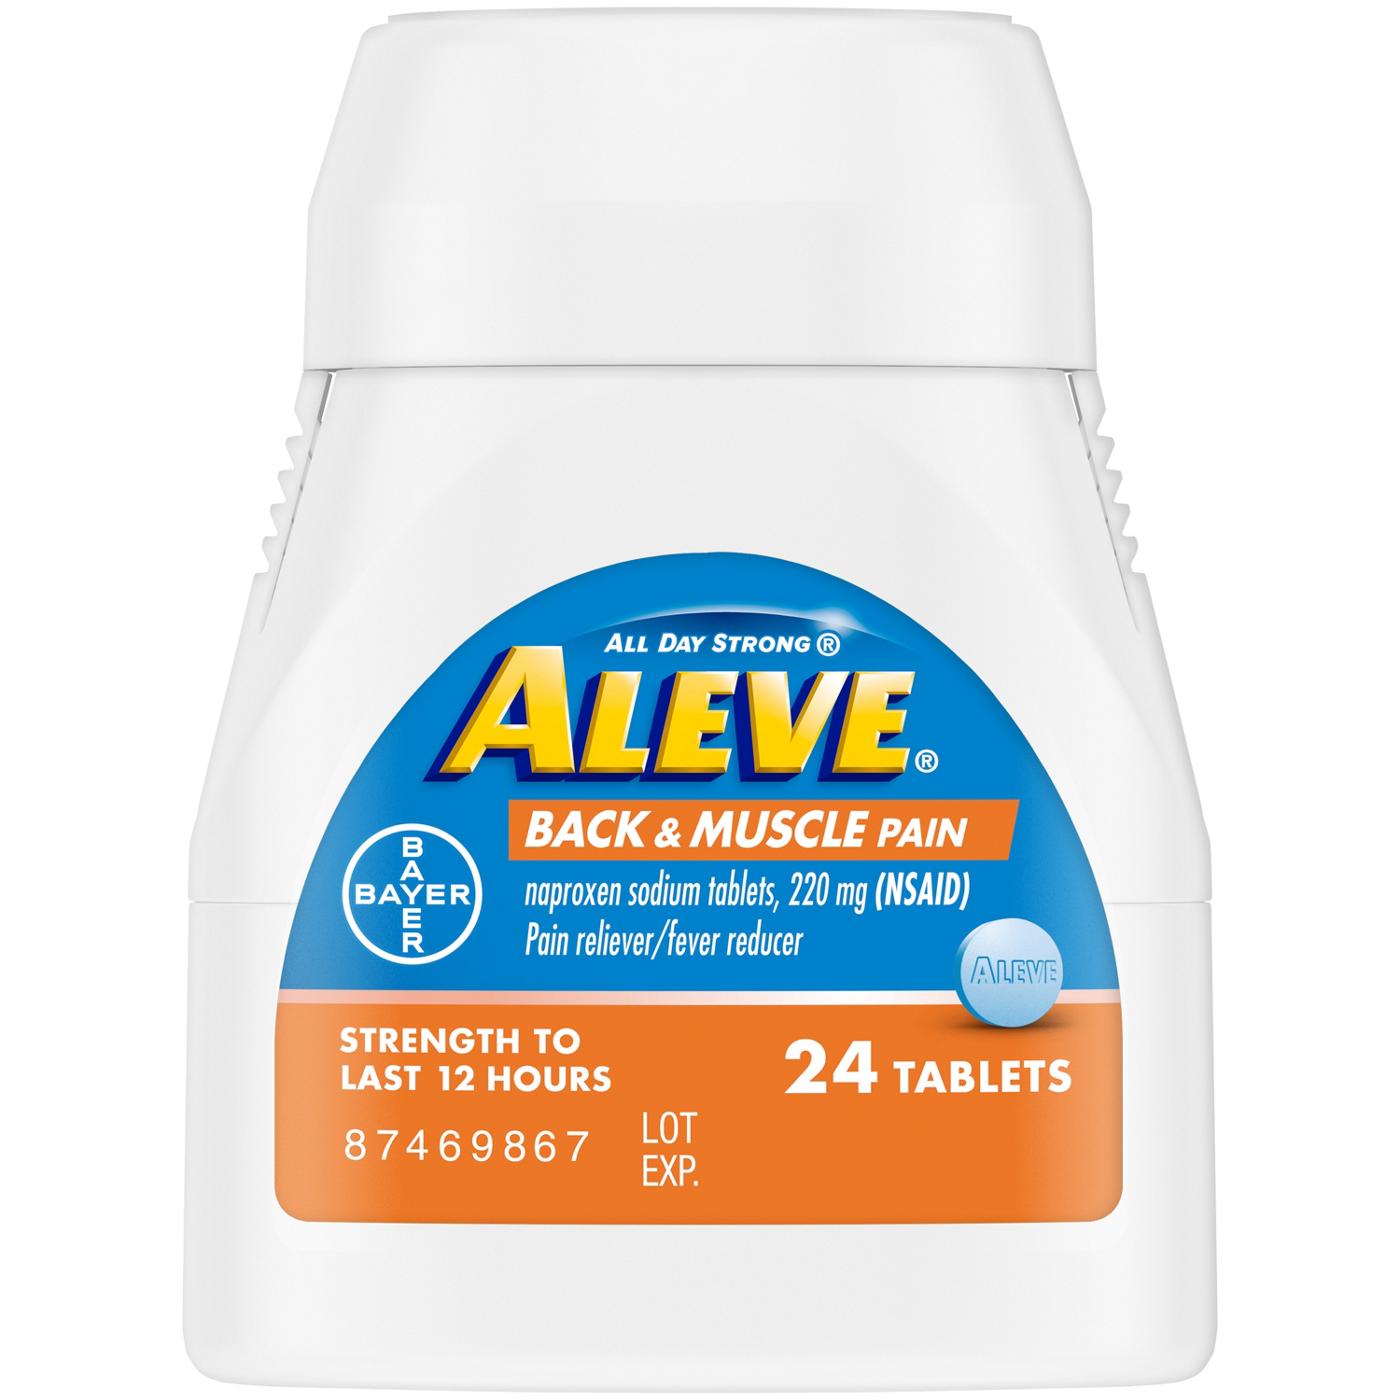 Aleve Back & Muscle Pain Naproxen 220mg Tablets; image 6 of 6